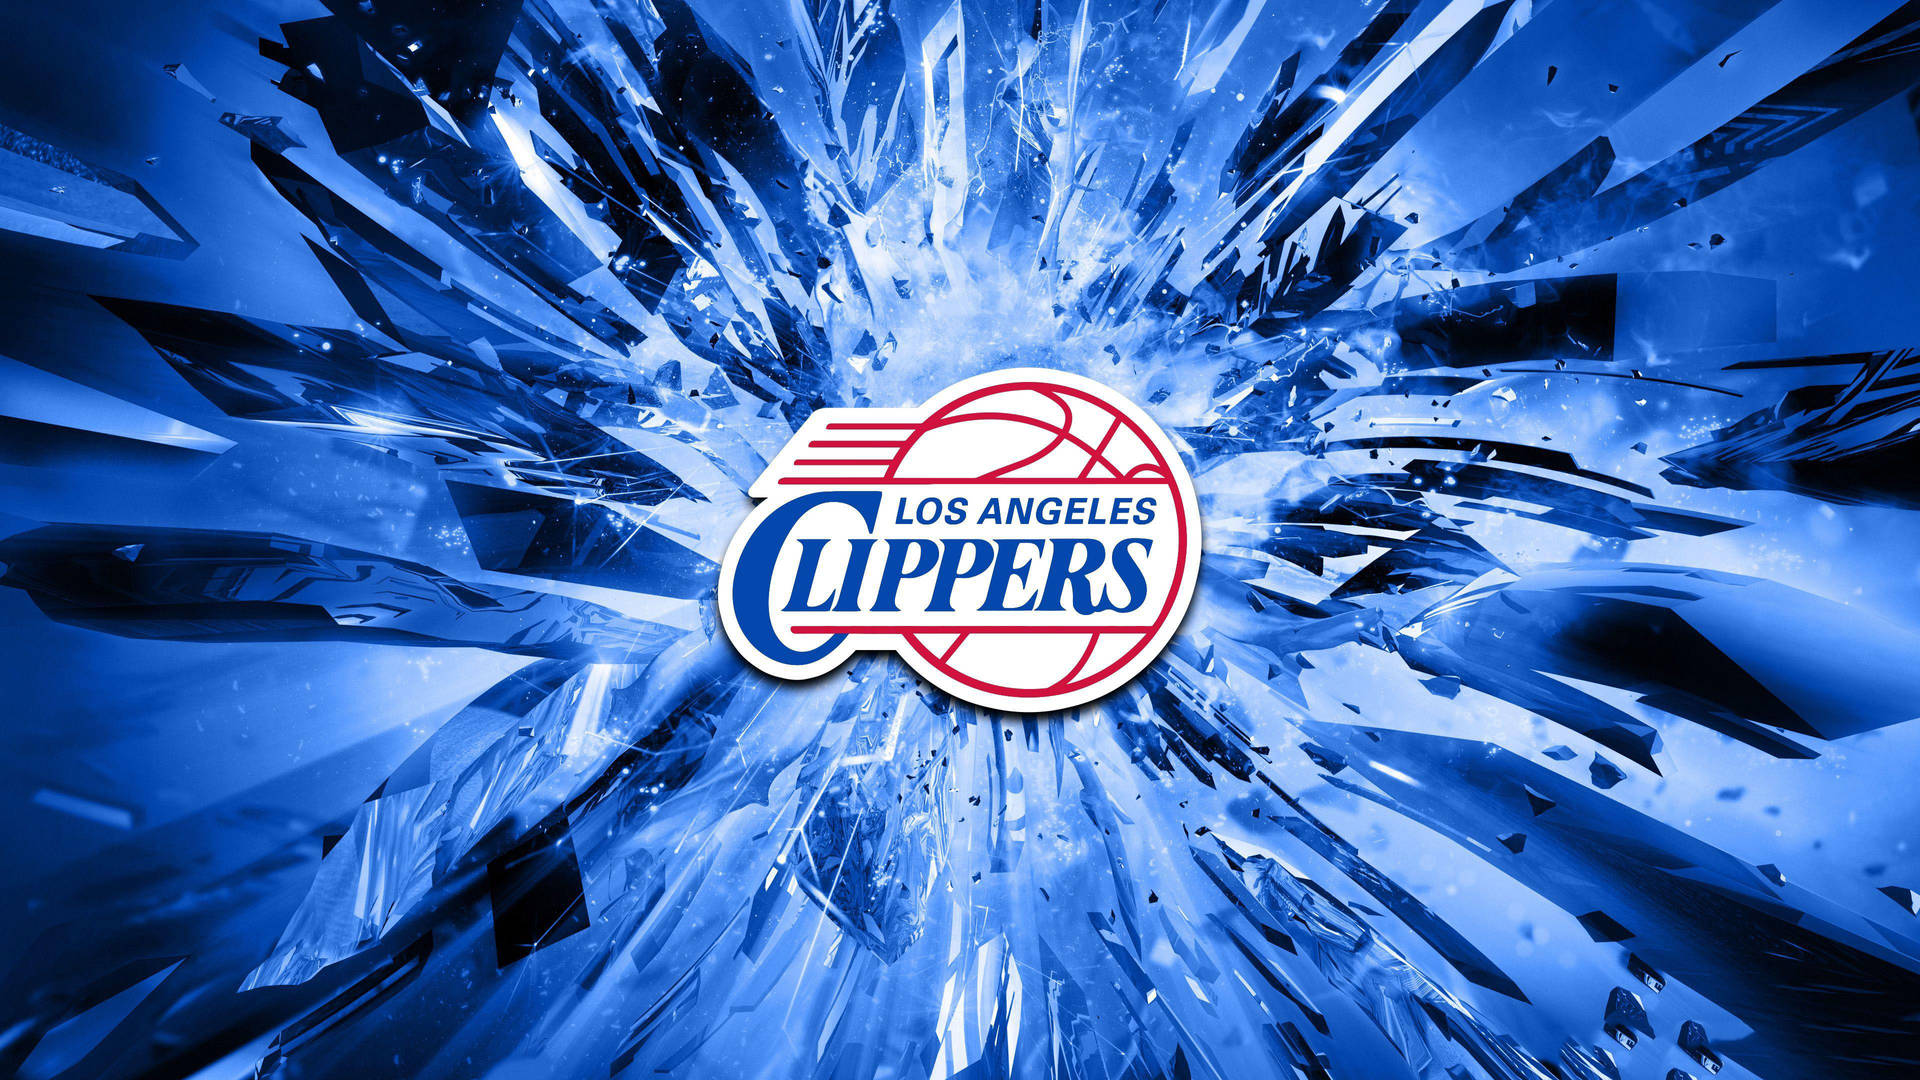 Losangeles Clippers Kristall Wallpaper